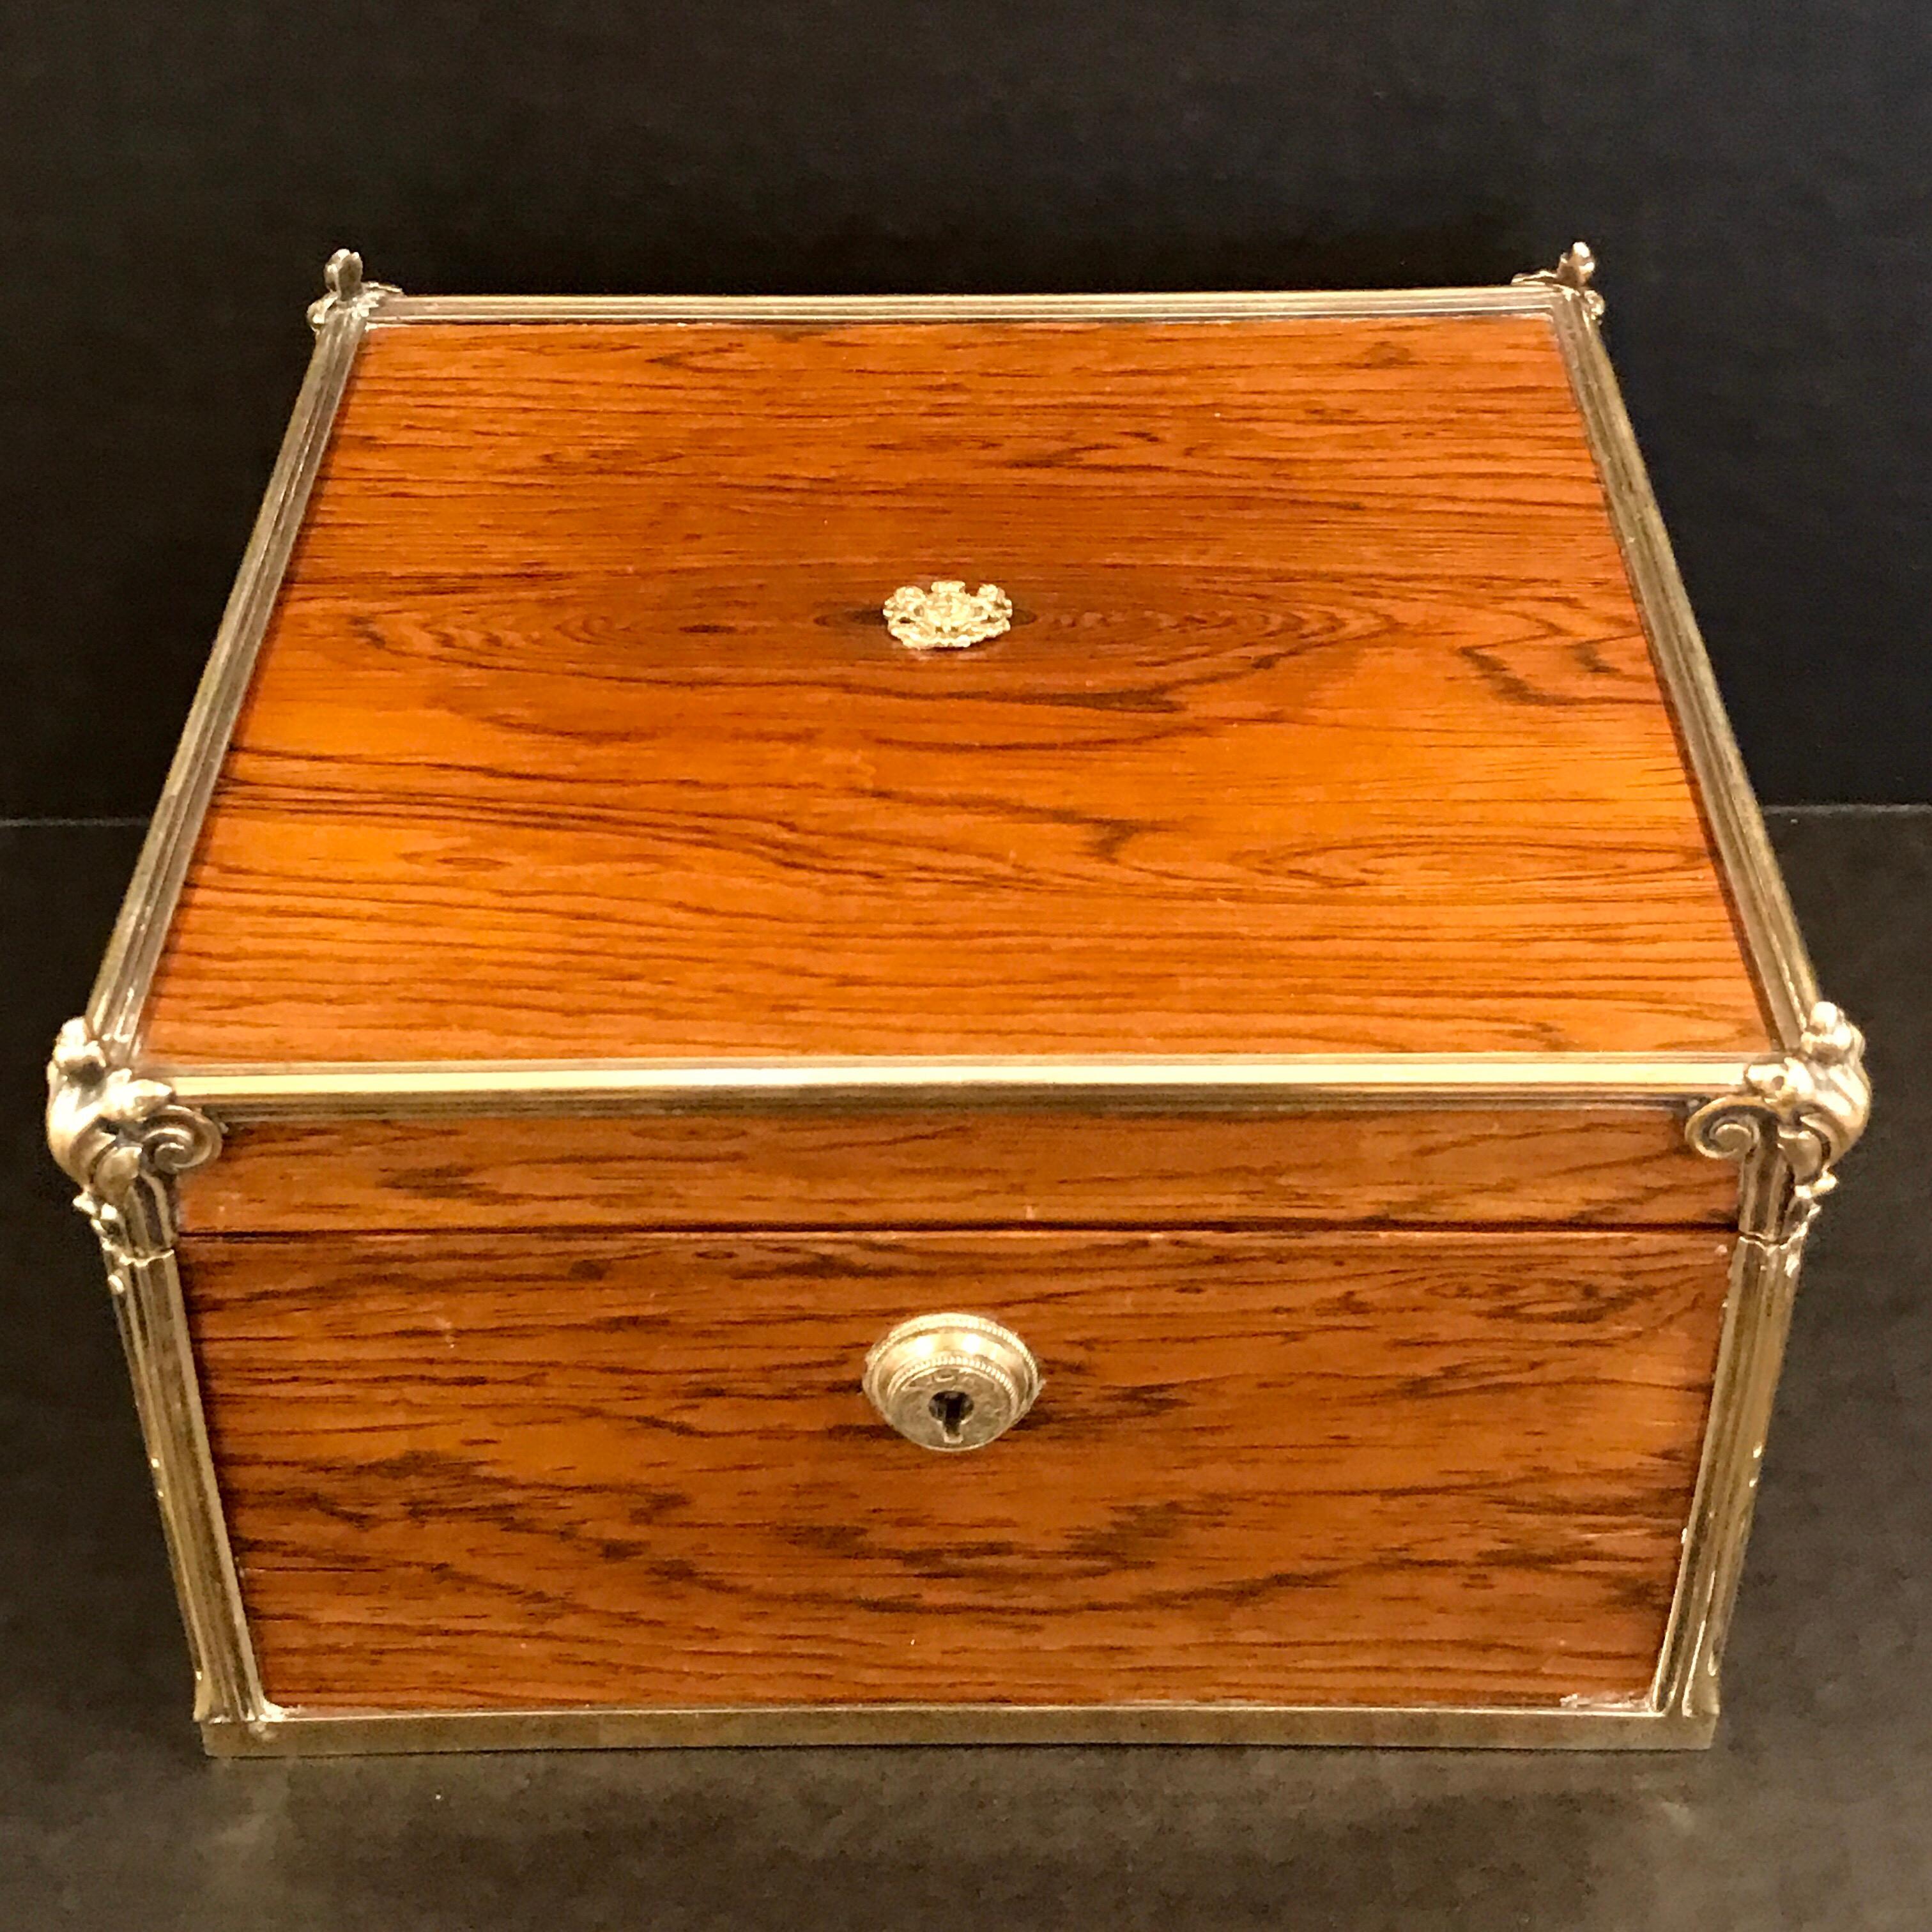 Royal Paul Storr Royal toilet box, London, 1813
of square form, the beautiful amboyna wood case with the silver- gilt Royal Coat of Arms, with silver hallmarked mounts including the screws, hinges, and locks by the master silversmith Paul Storr, the